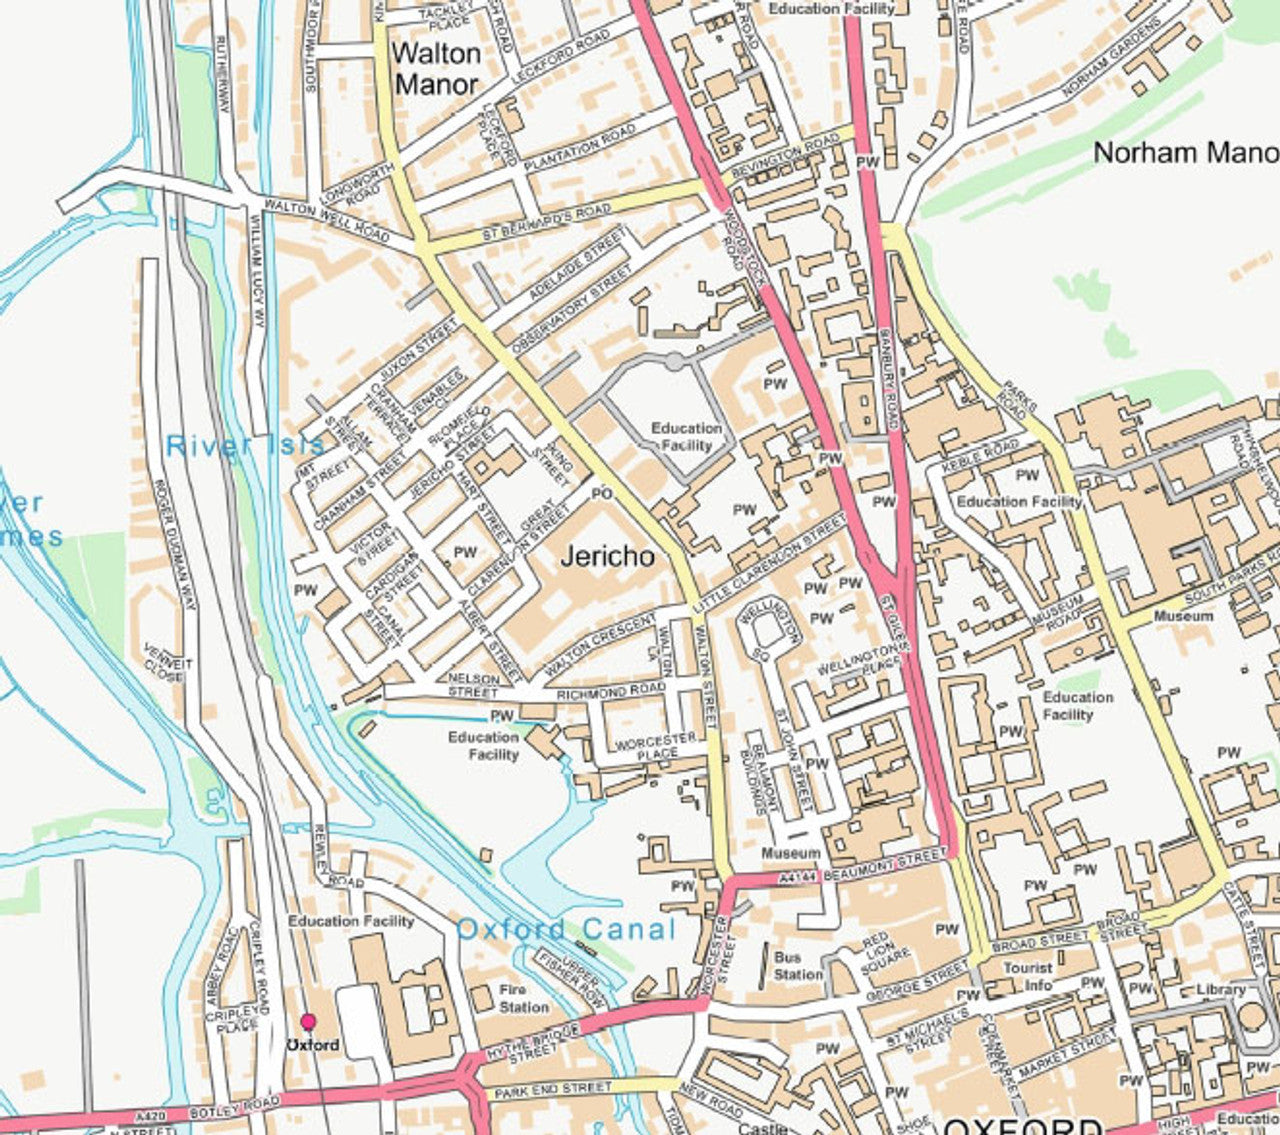 Central Oxford City Street Map - Digital Download